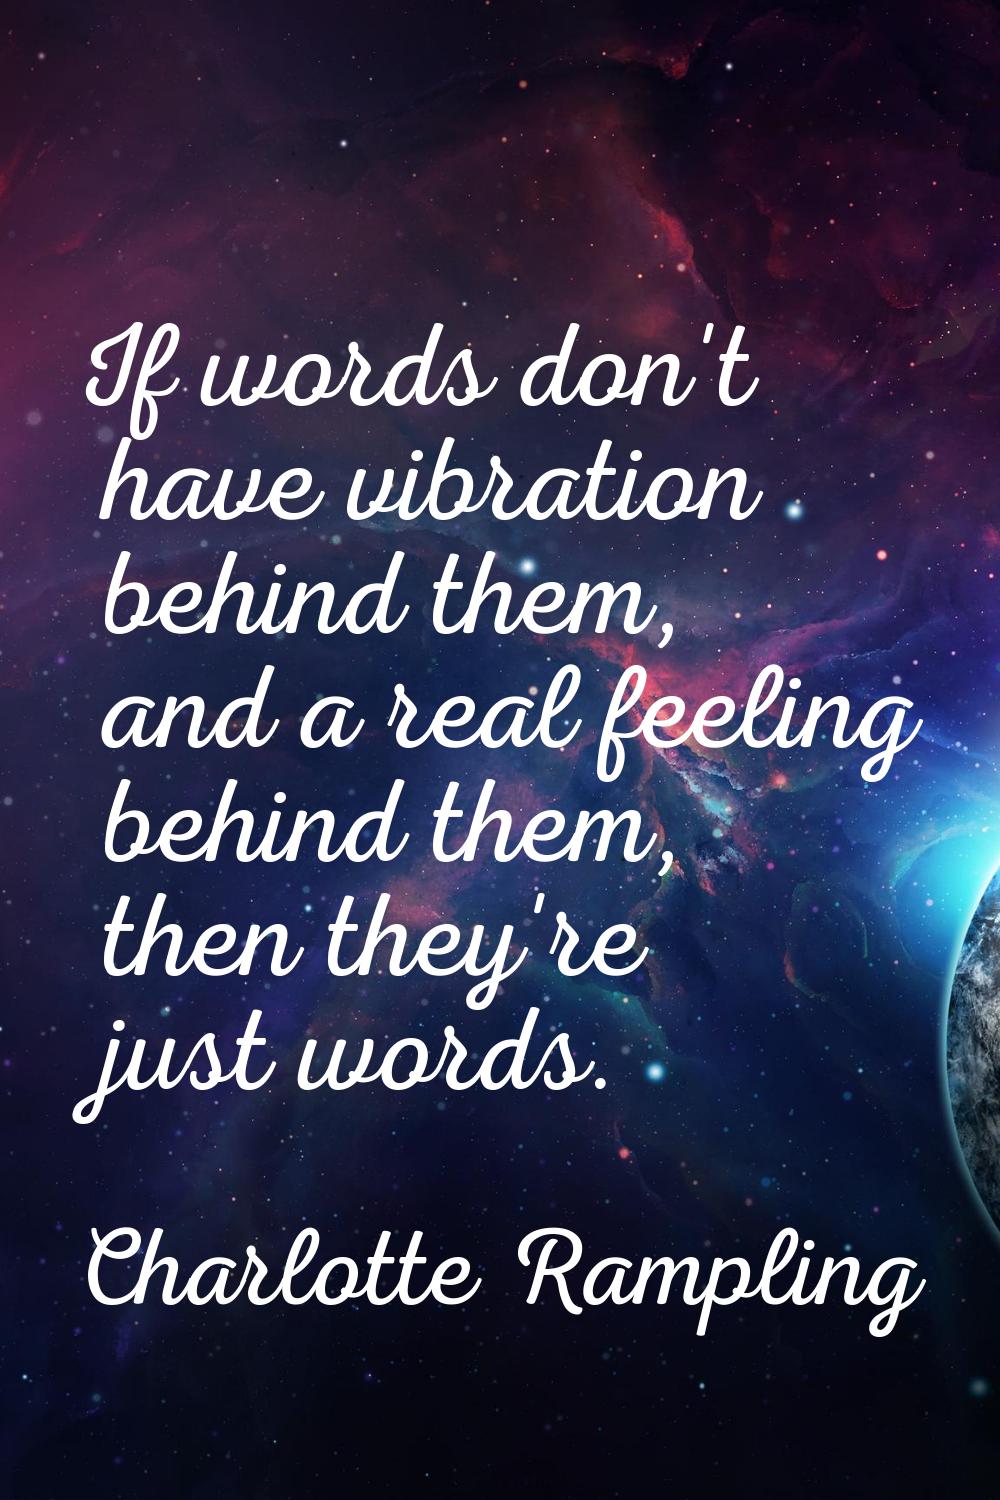 If words don't have vibration behind them, and a real feeling behind them, then they're just words.